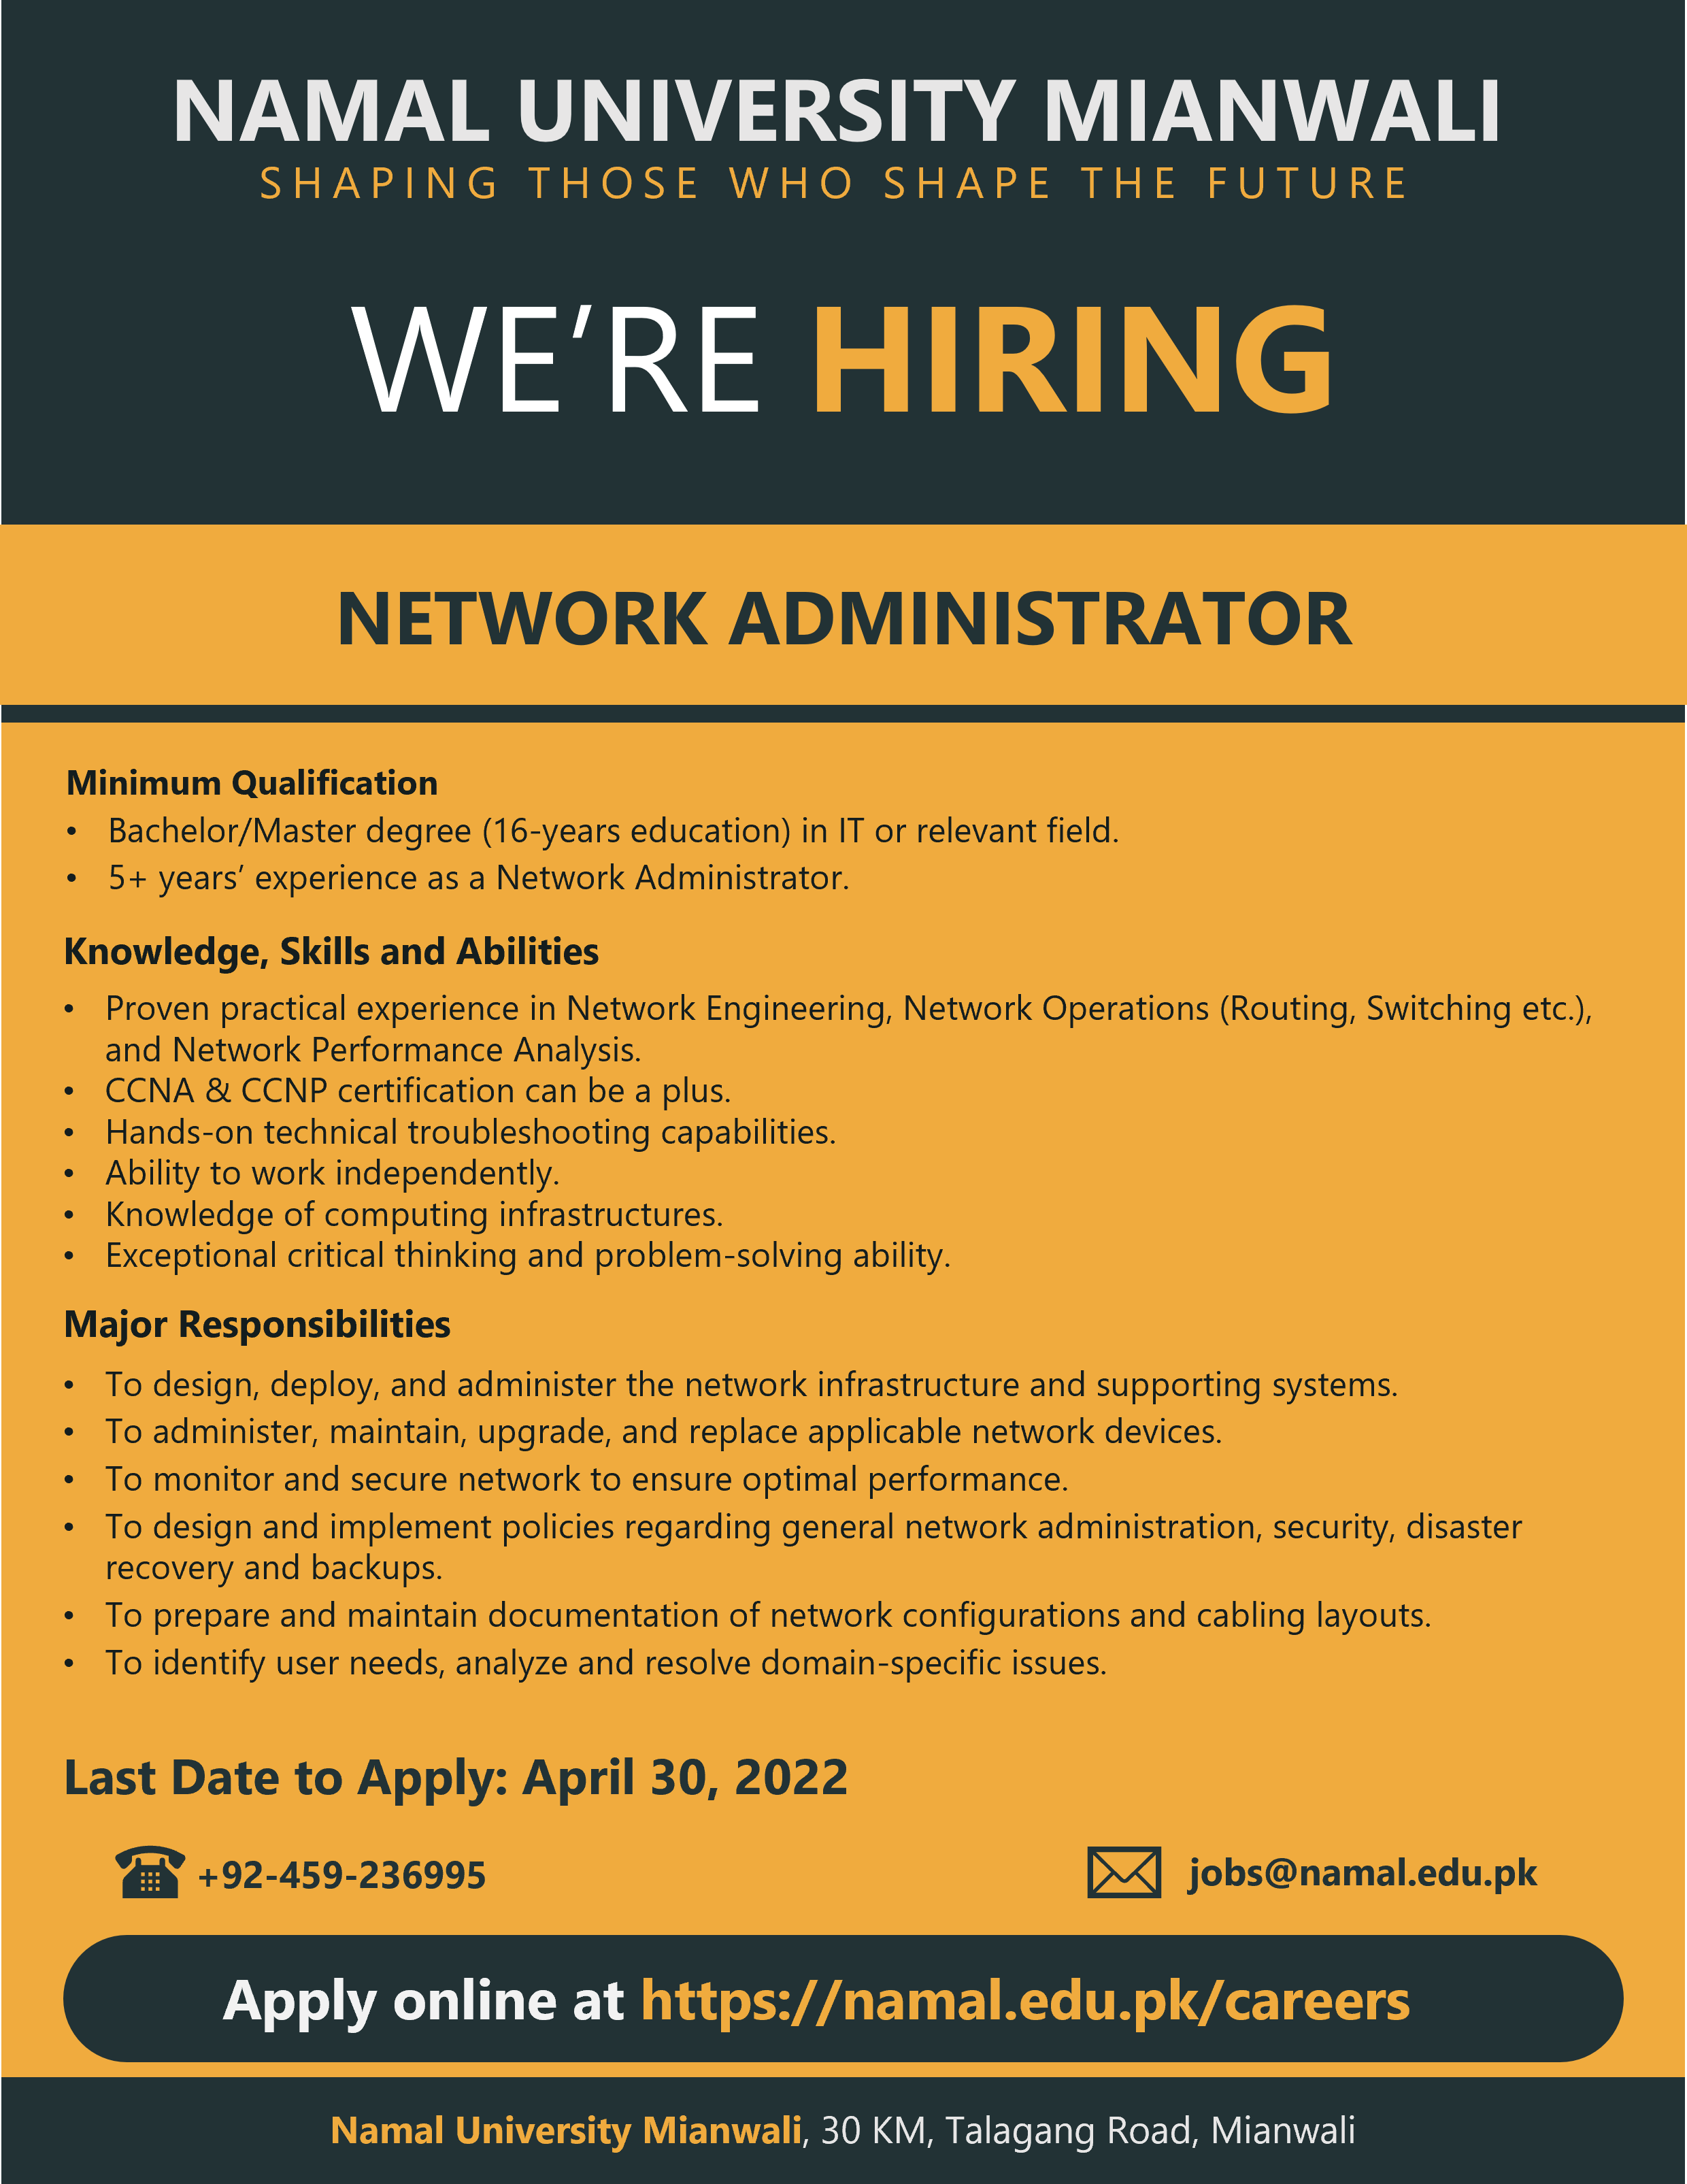 We are hiring! NETWORK ADMINISTRATOR